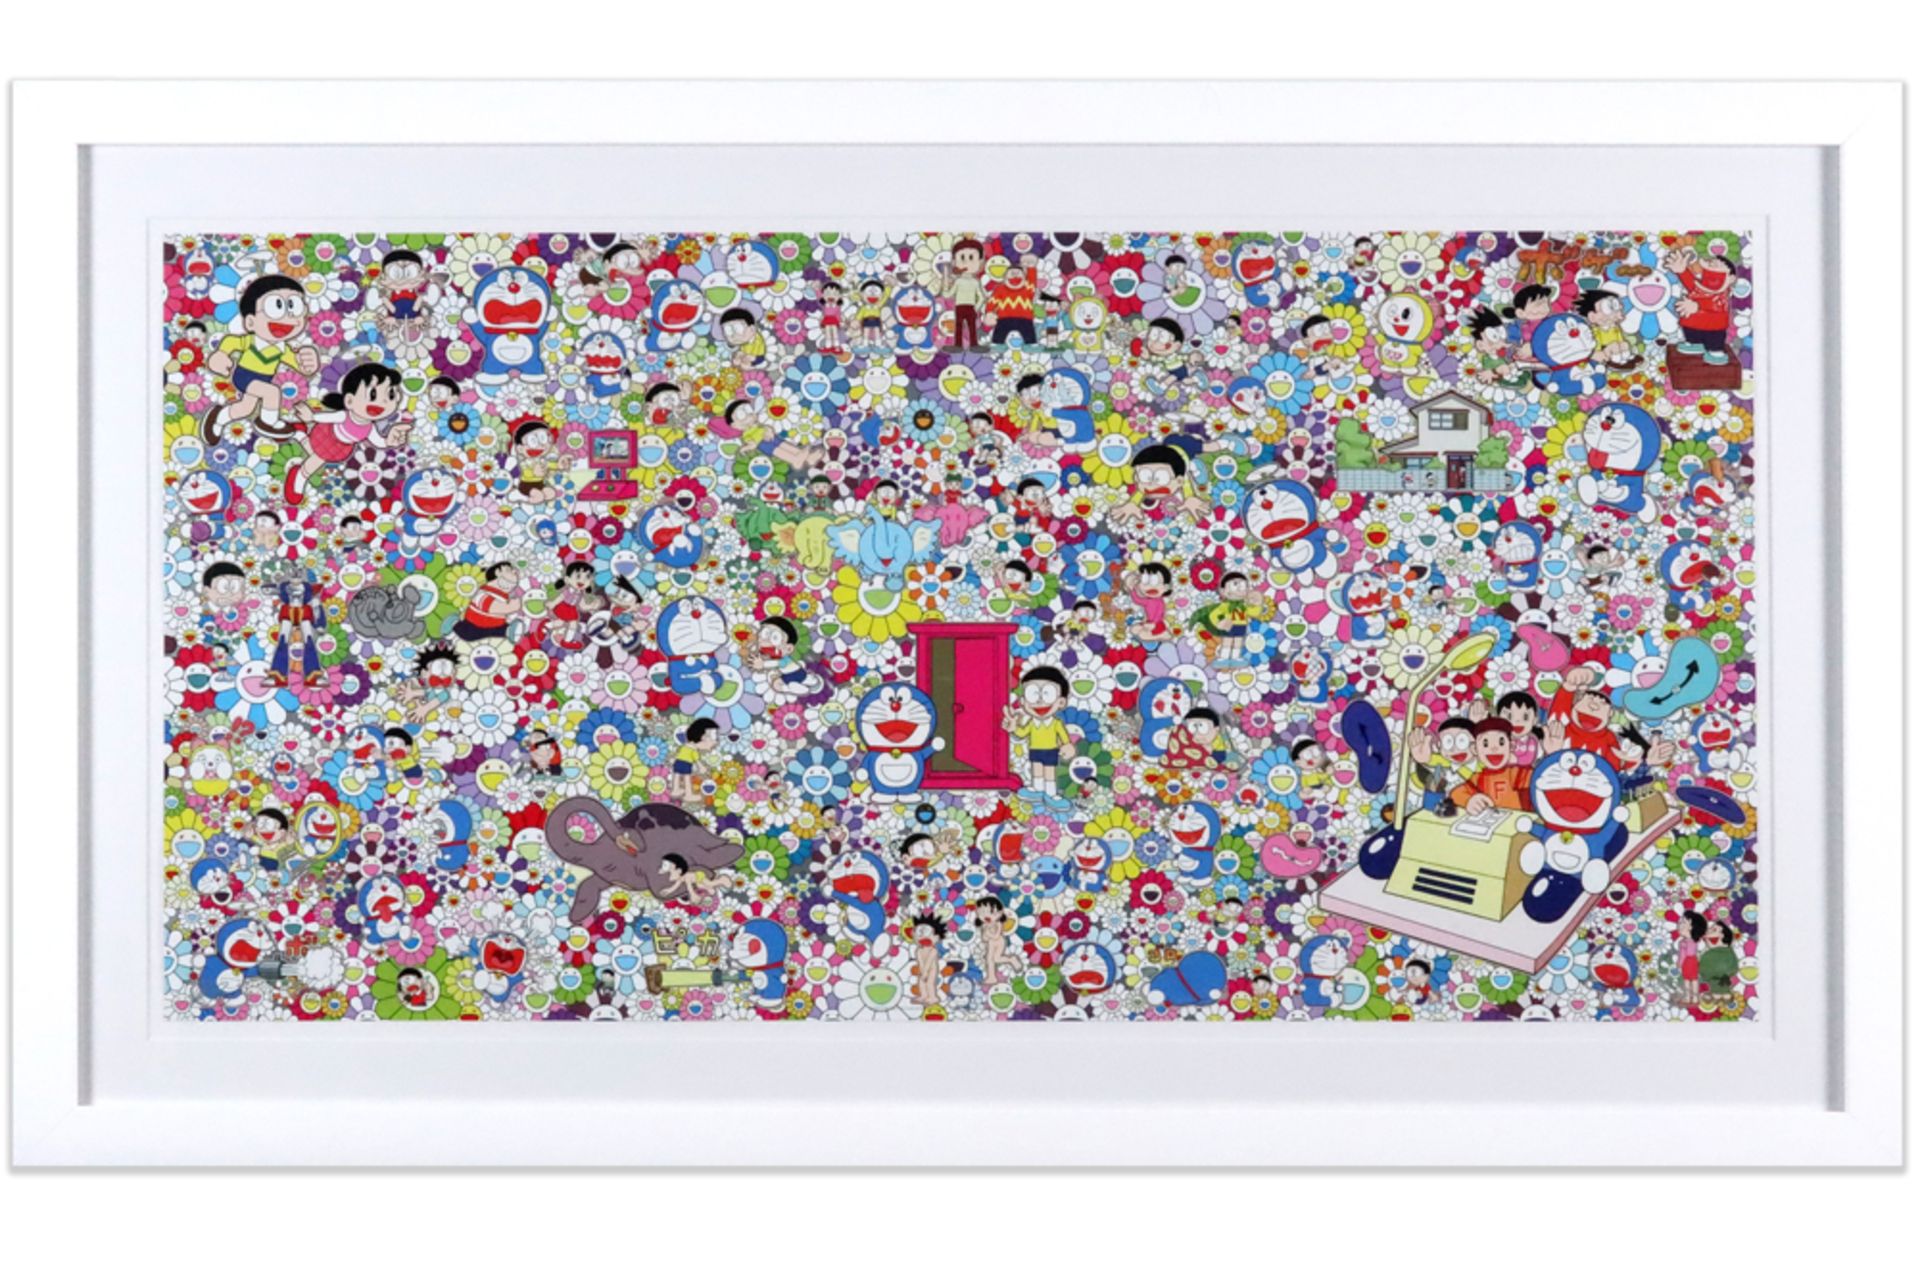 Takashi Murakami "That Sounds Good, I Hope You Can Do That" offset lithograph printed in colors - - Bild 4 aus 4